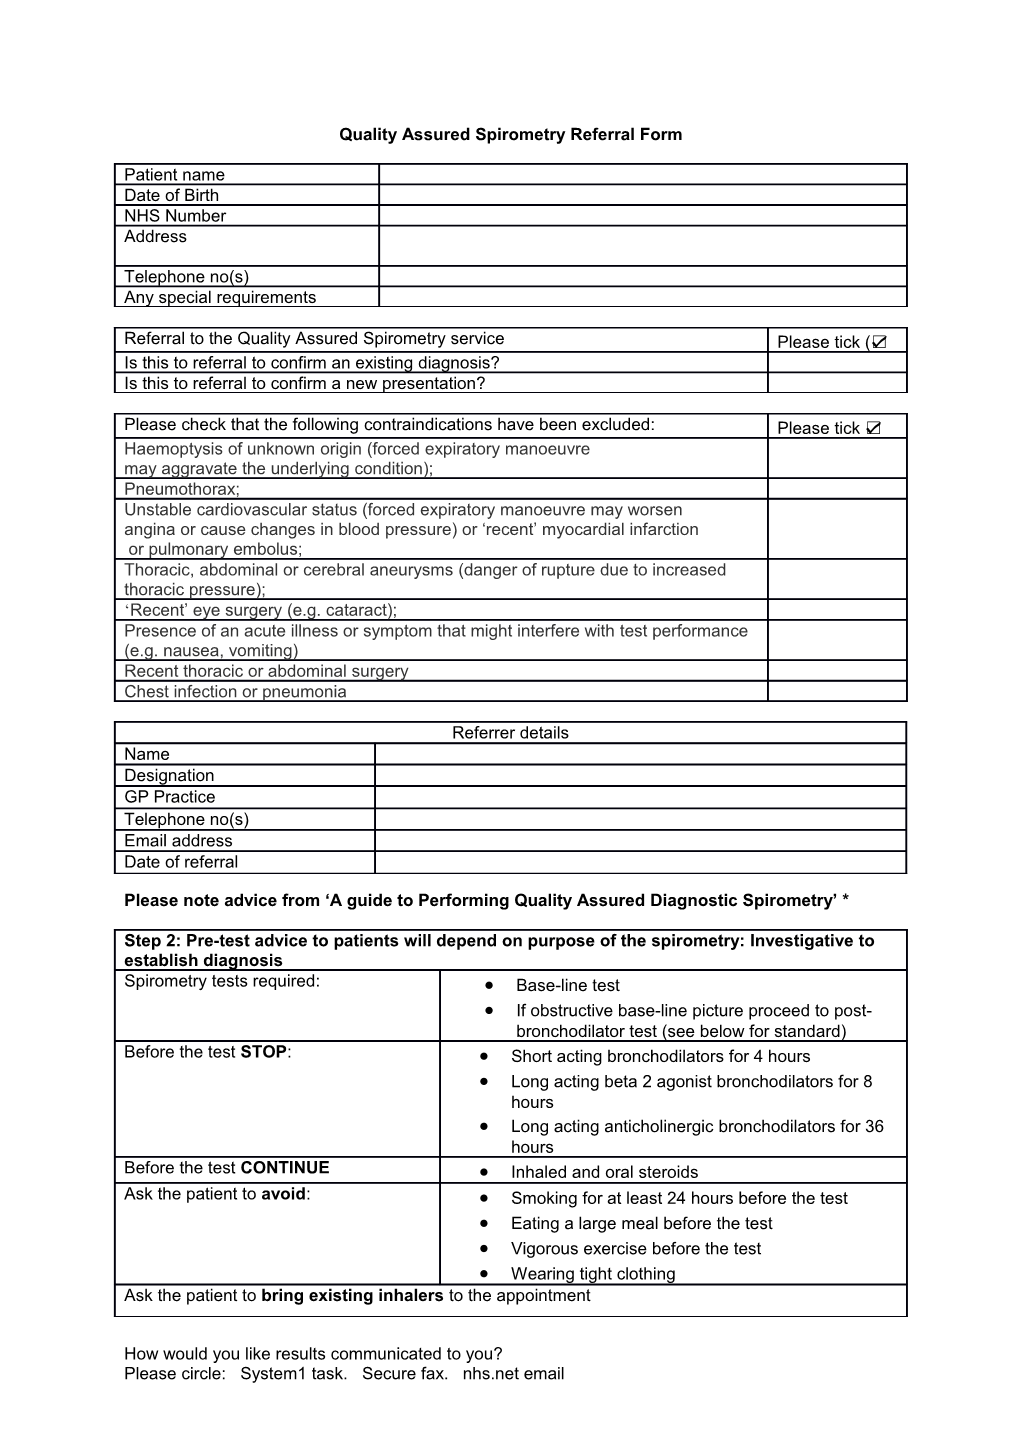 Quality Assured Spirometry Referral Form